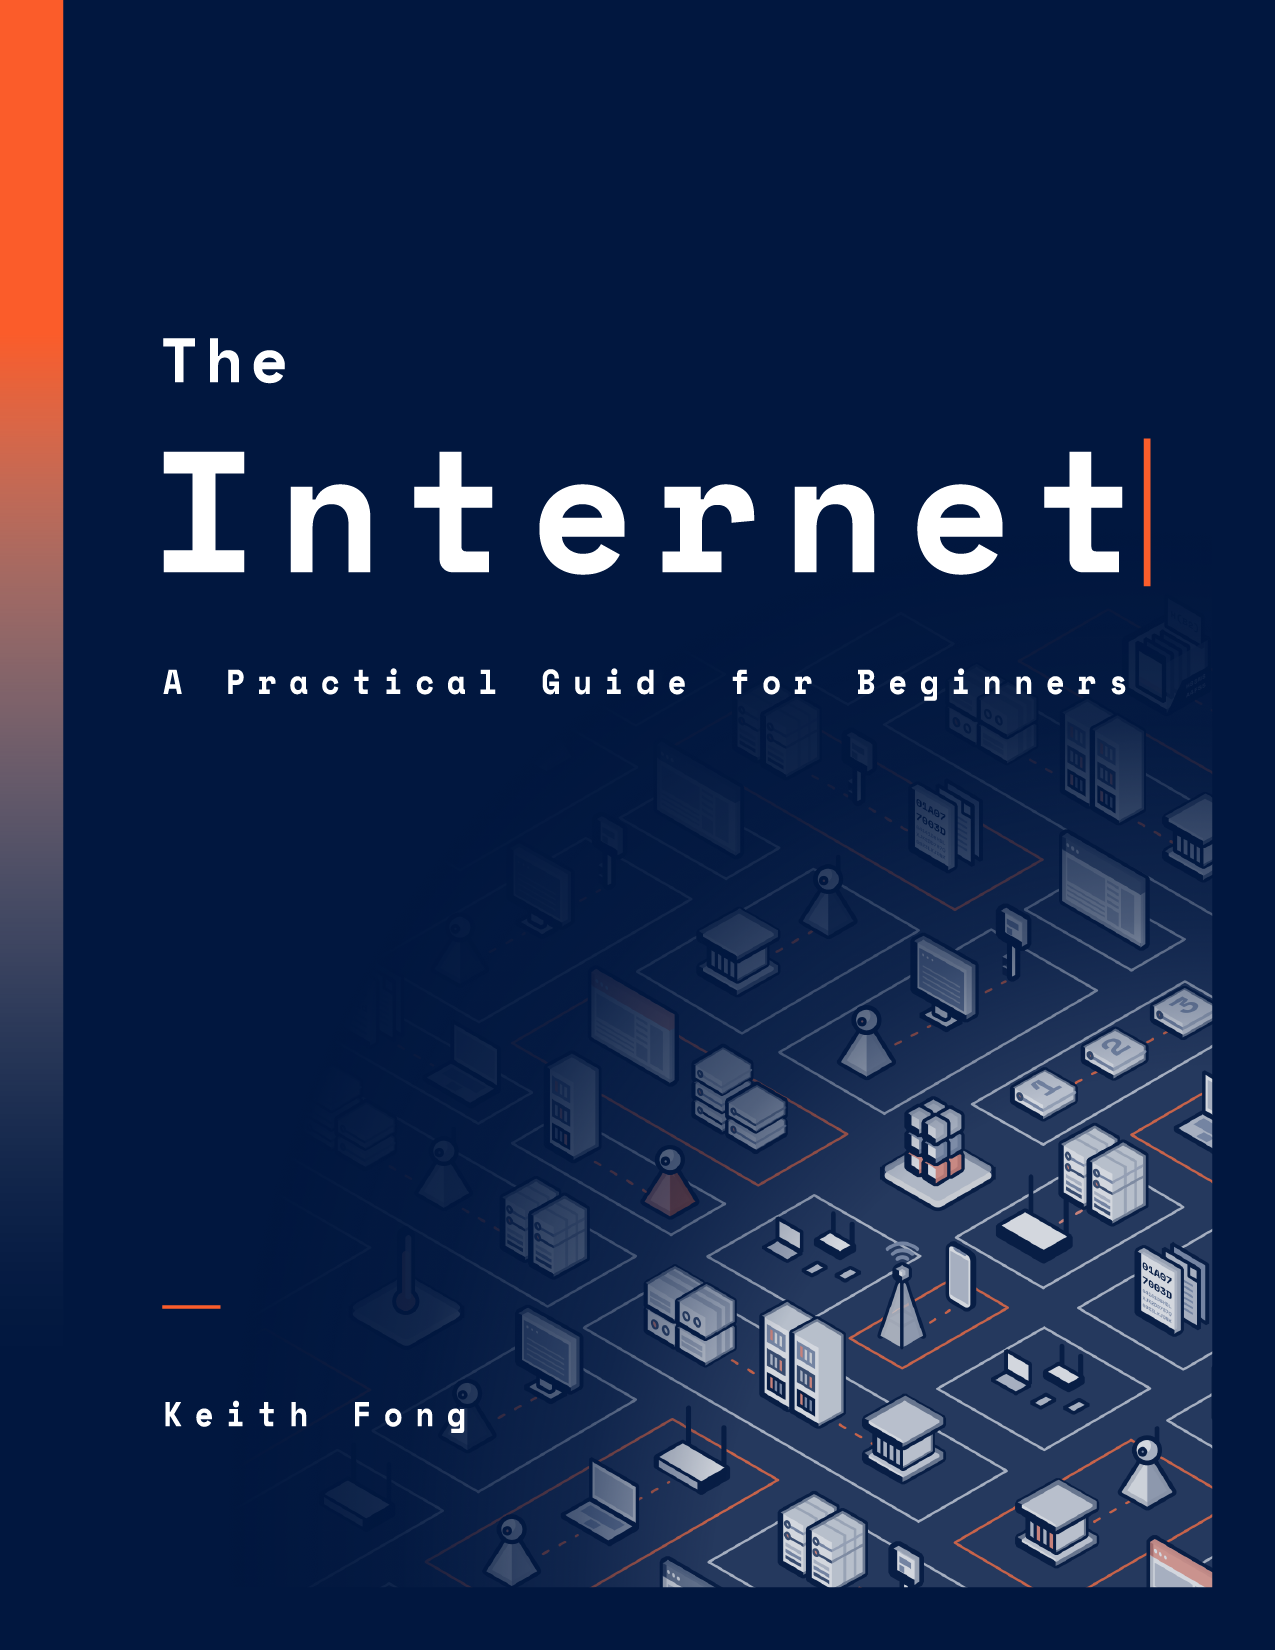 The Internet: A Practial Guide for Beginners